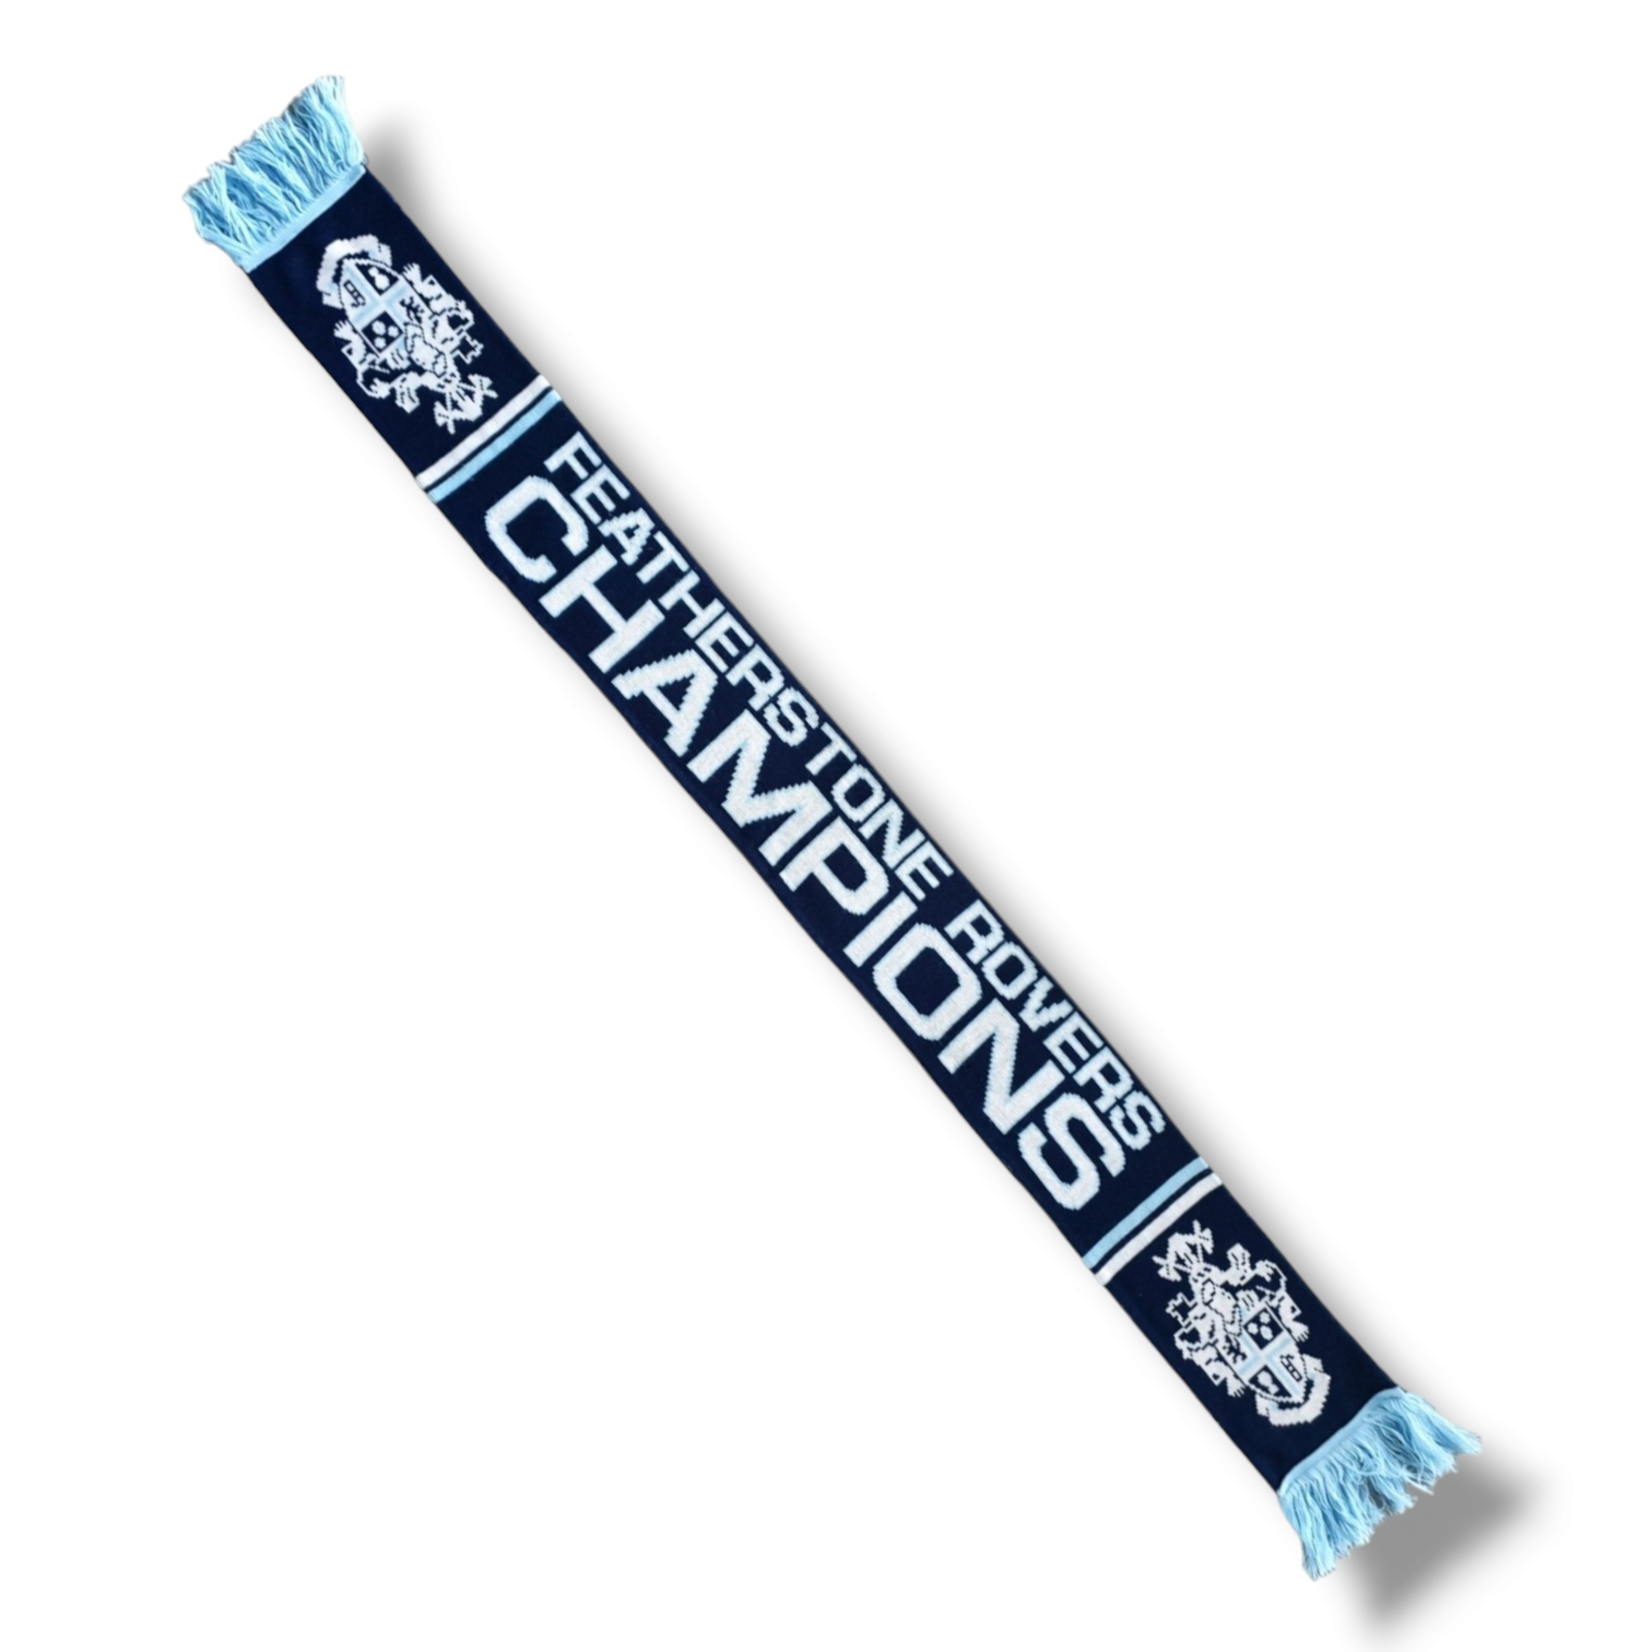 Scarf Original Rugby Fan Scarf Featherstone Rovers